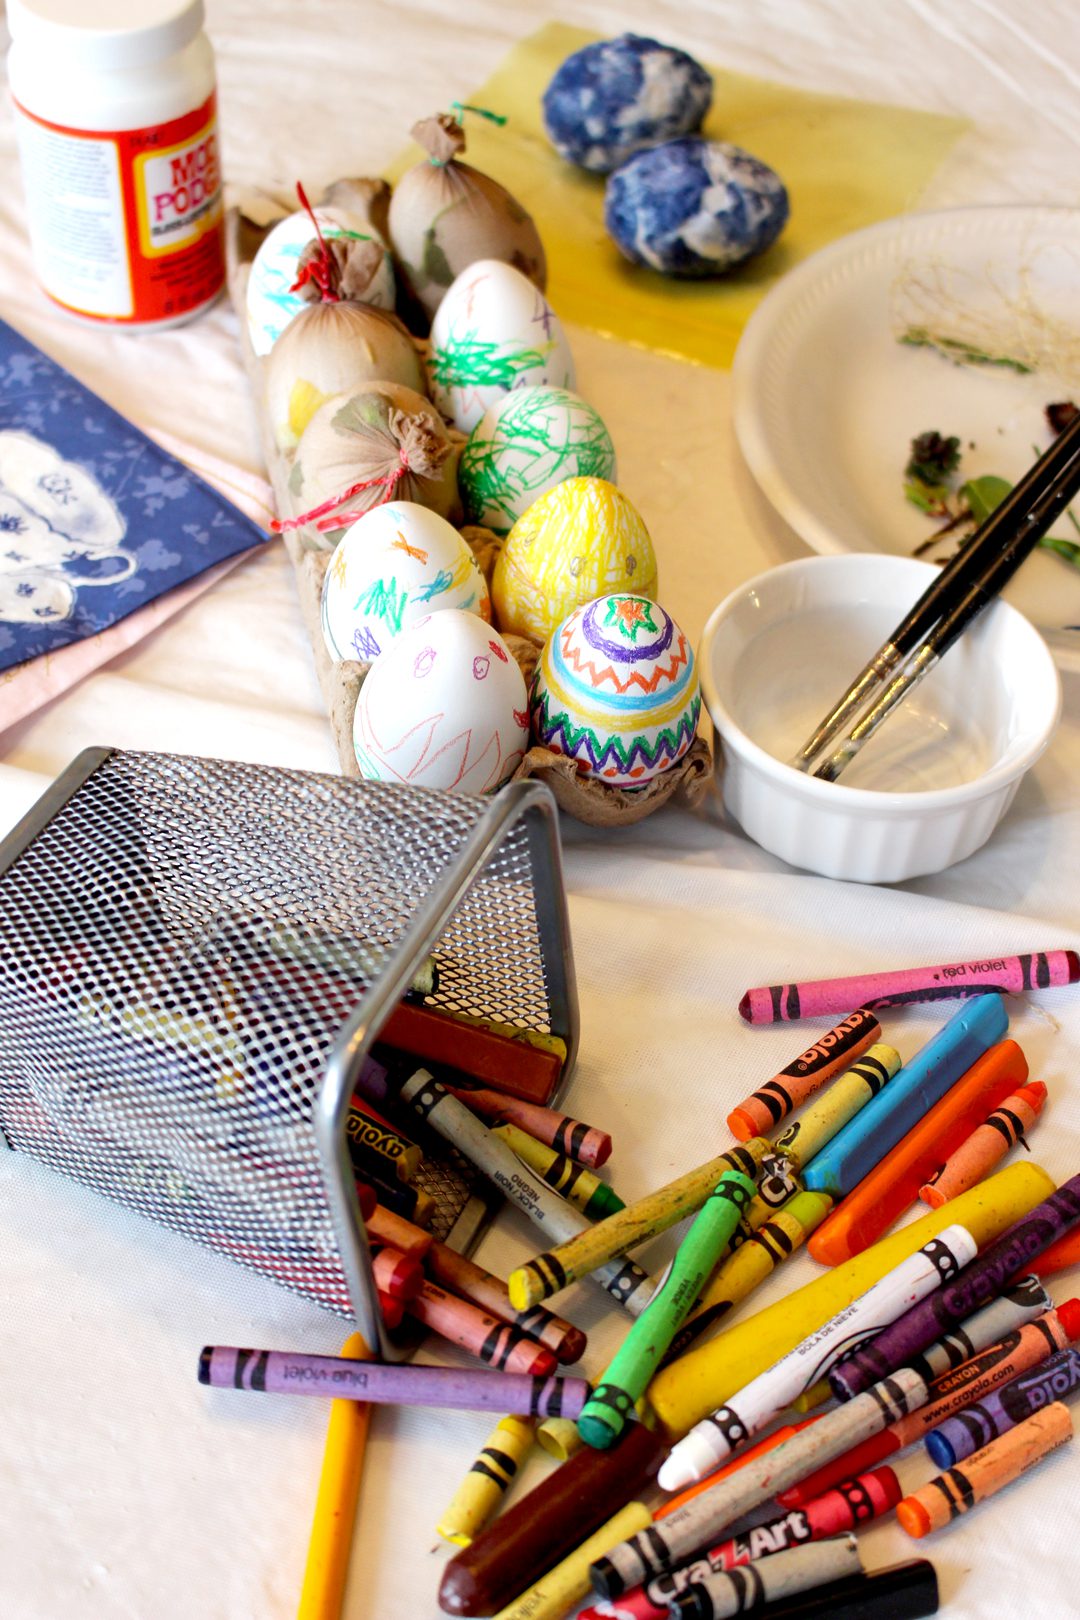 Colored Easter eggs surrounded by Mod Podge, paint brushes, and crayons.